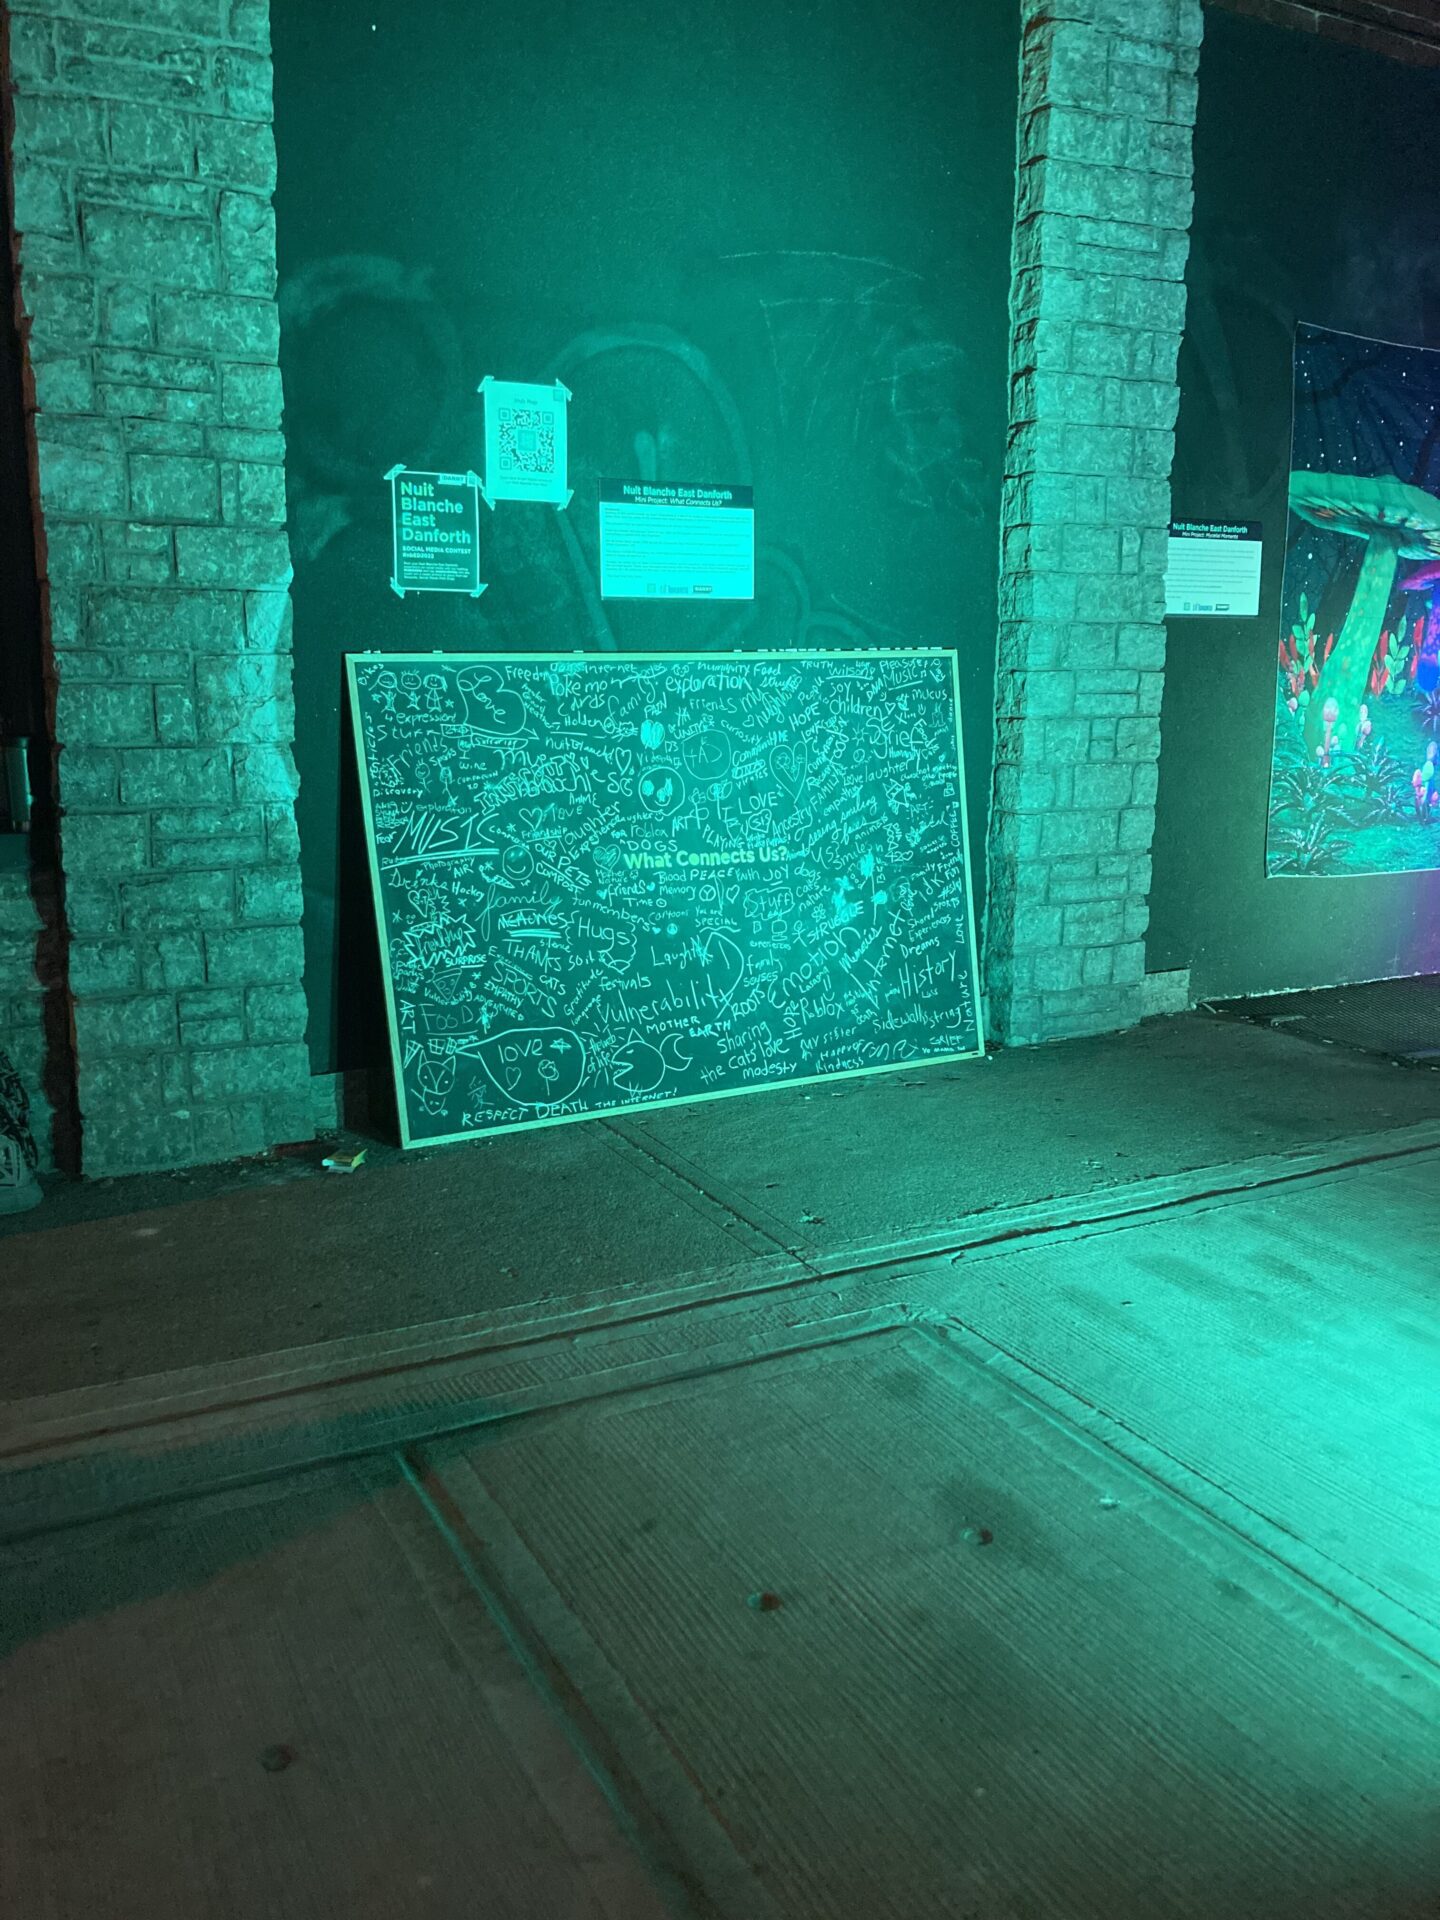 A fluorescent turquoise light shines against a chalkboard, covered in words and drawings related to the theme of "What Connects Us."